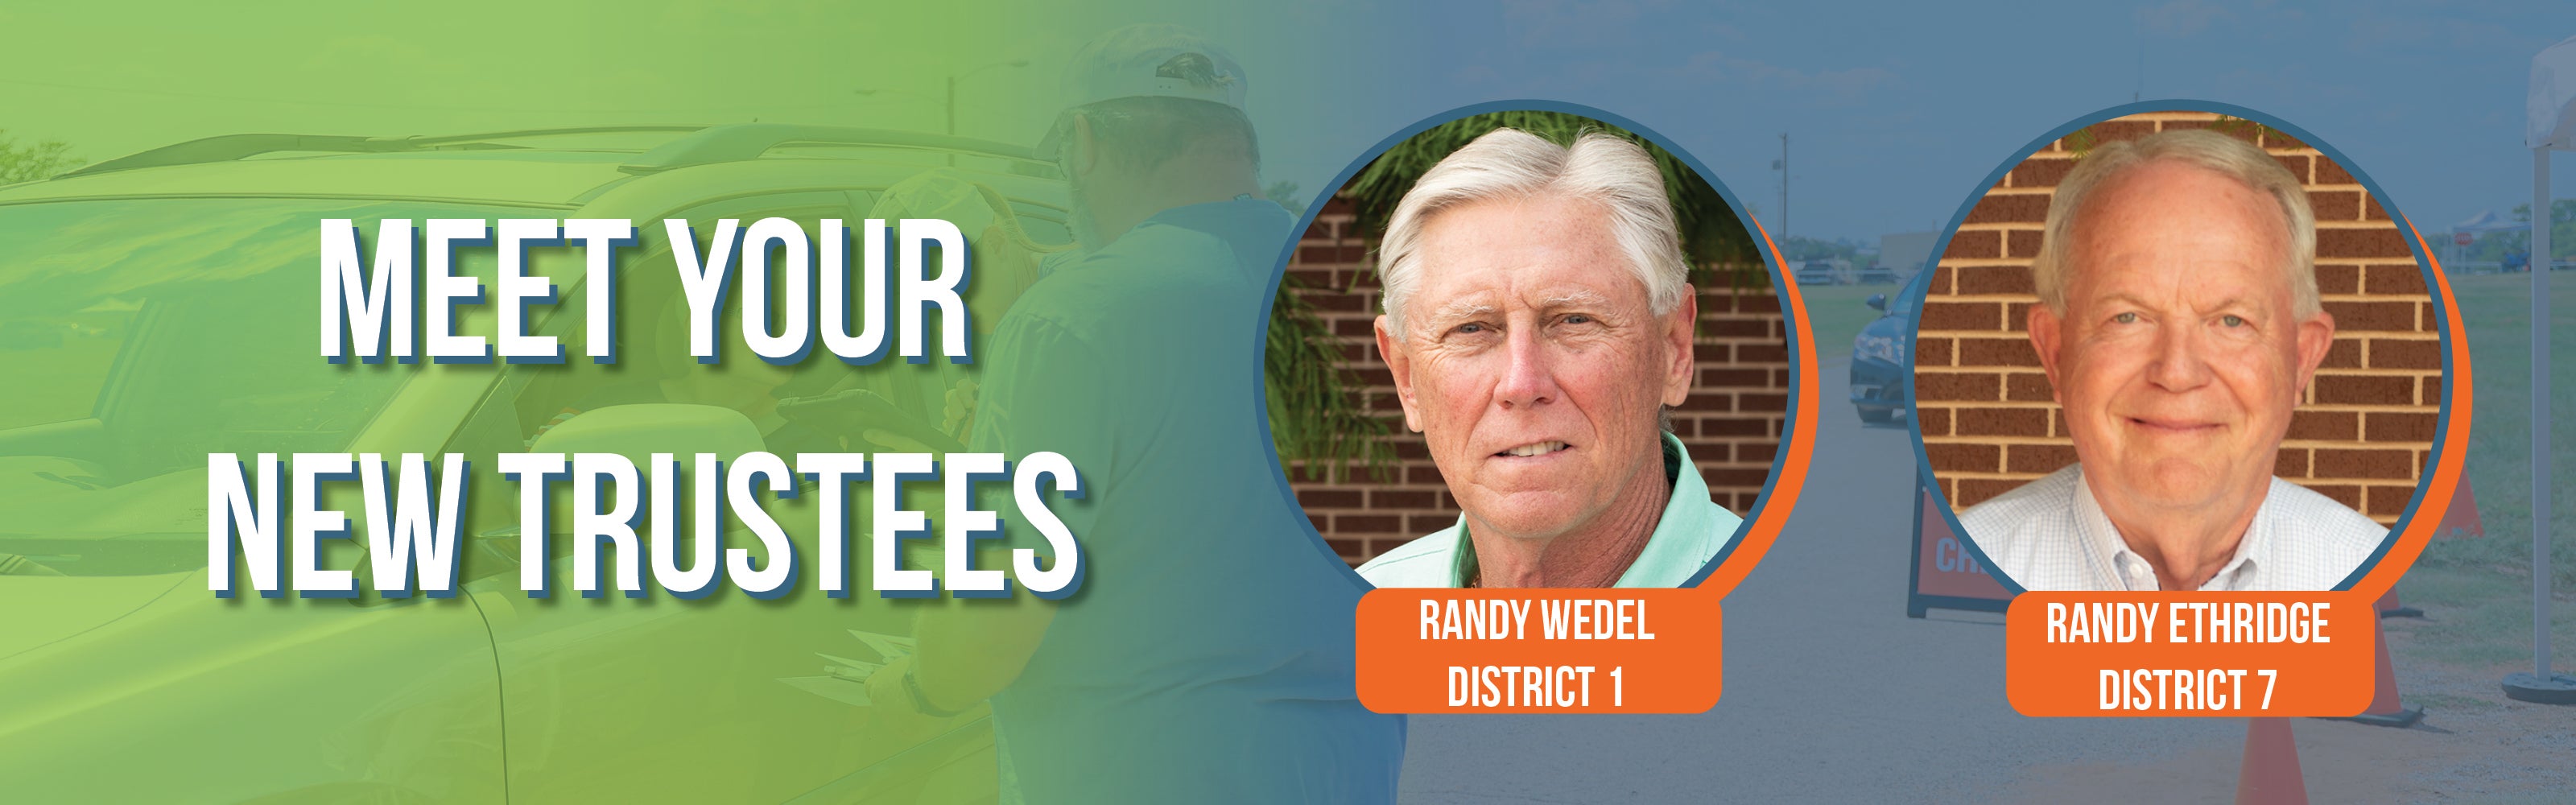 Meet your new trustees Randy Wedel District 1 and Randy Ethridge District 7